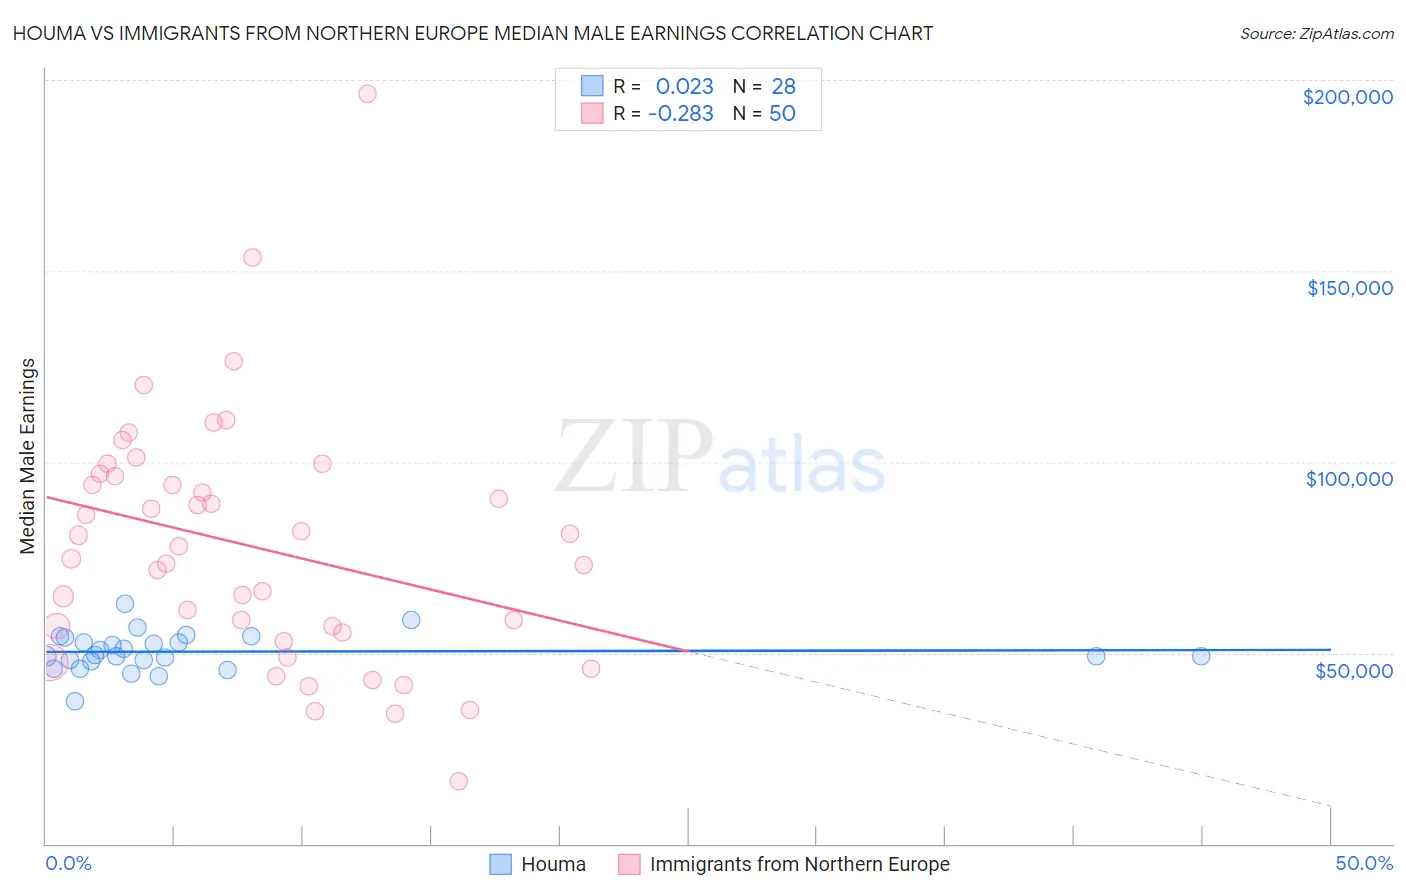 Houma vs Immigrants from Northern Europe Median Male Earnings